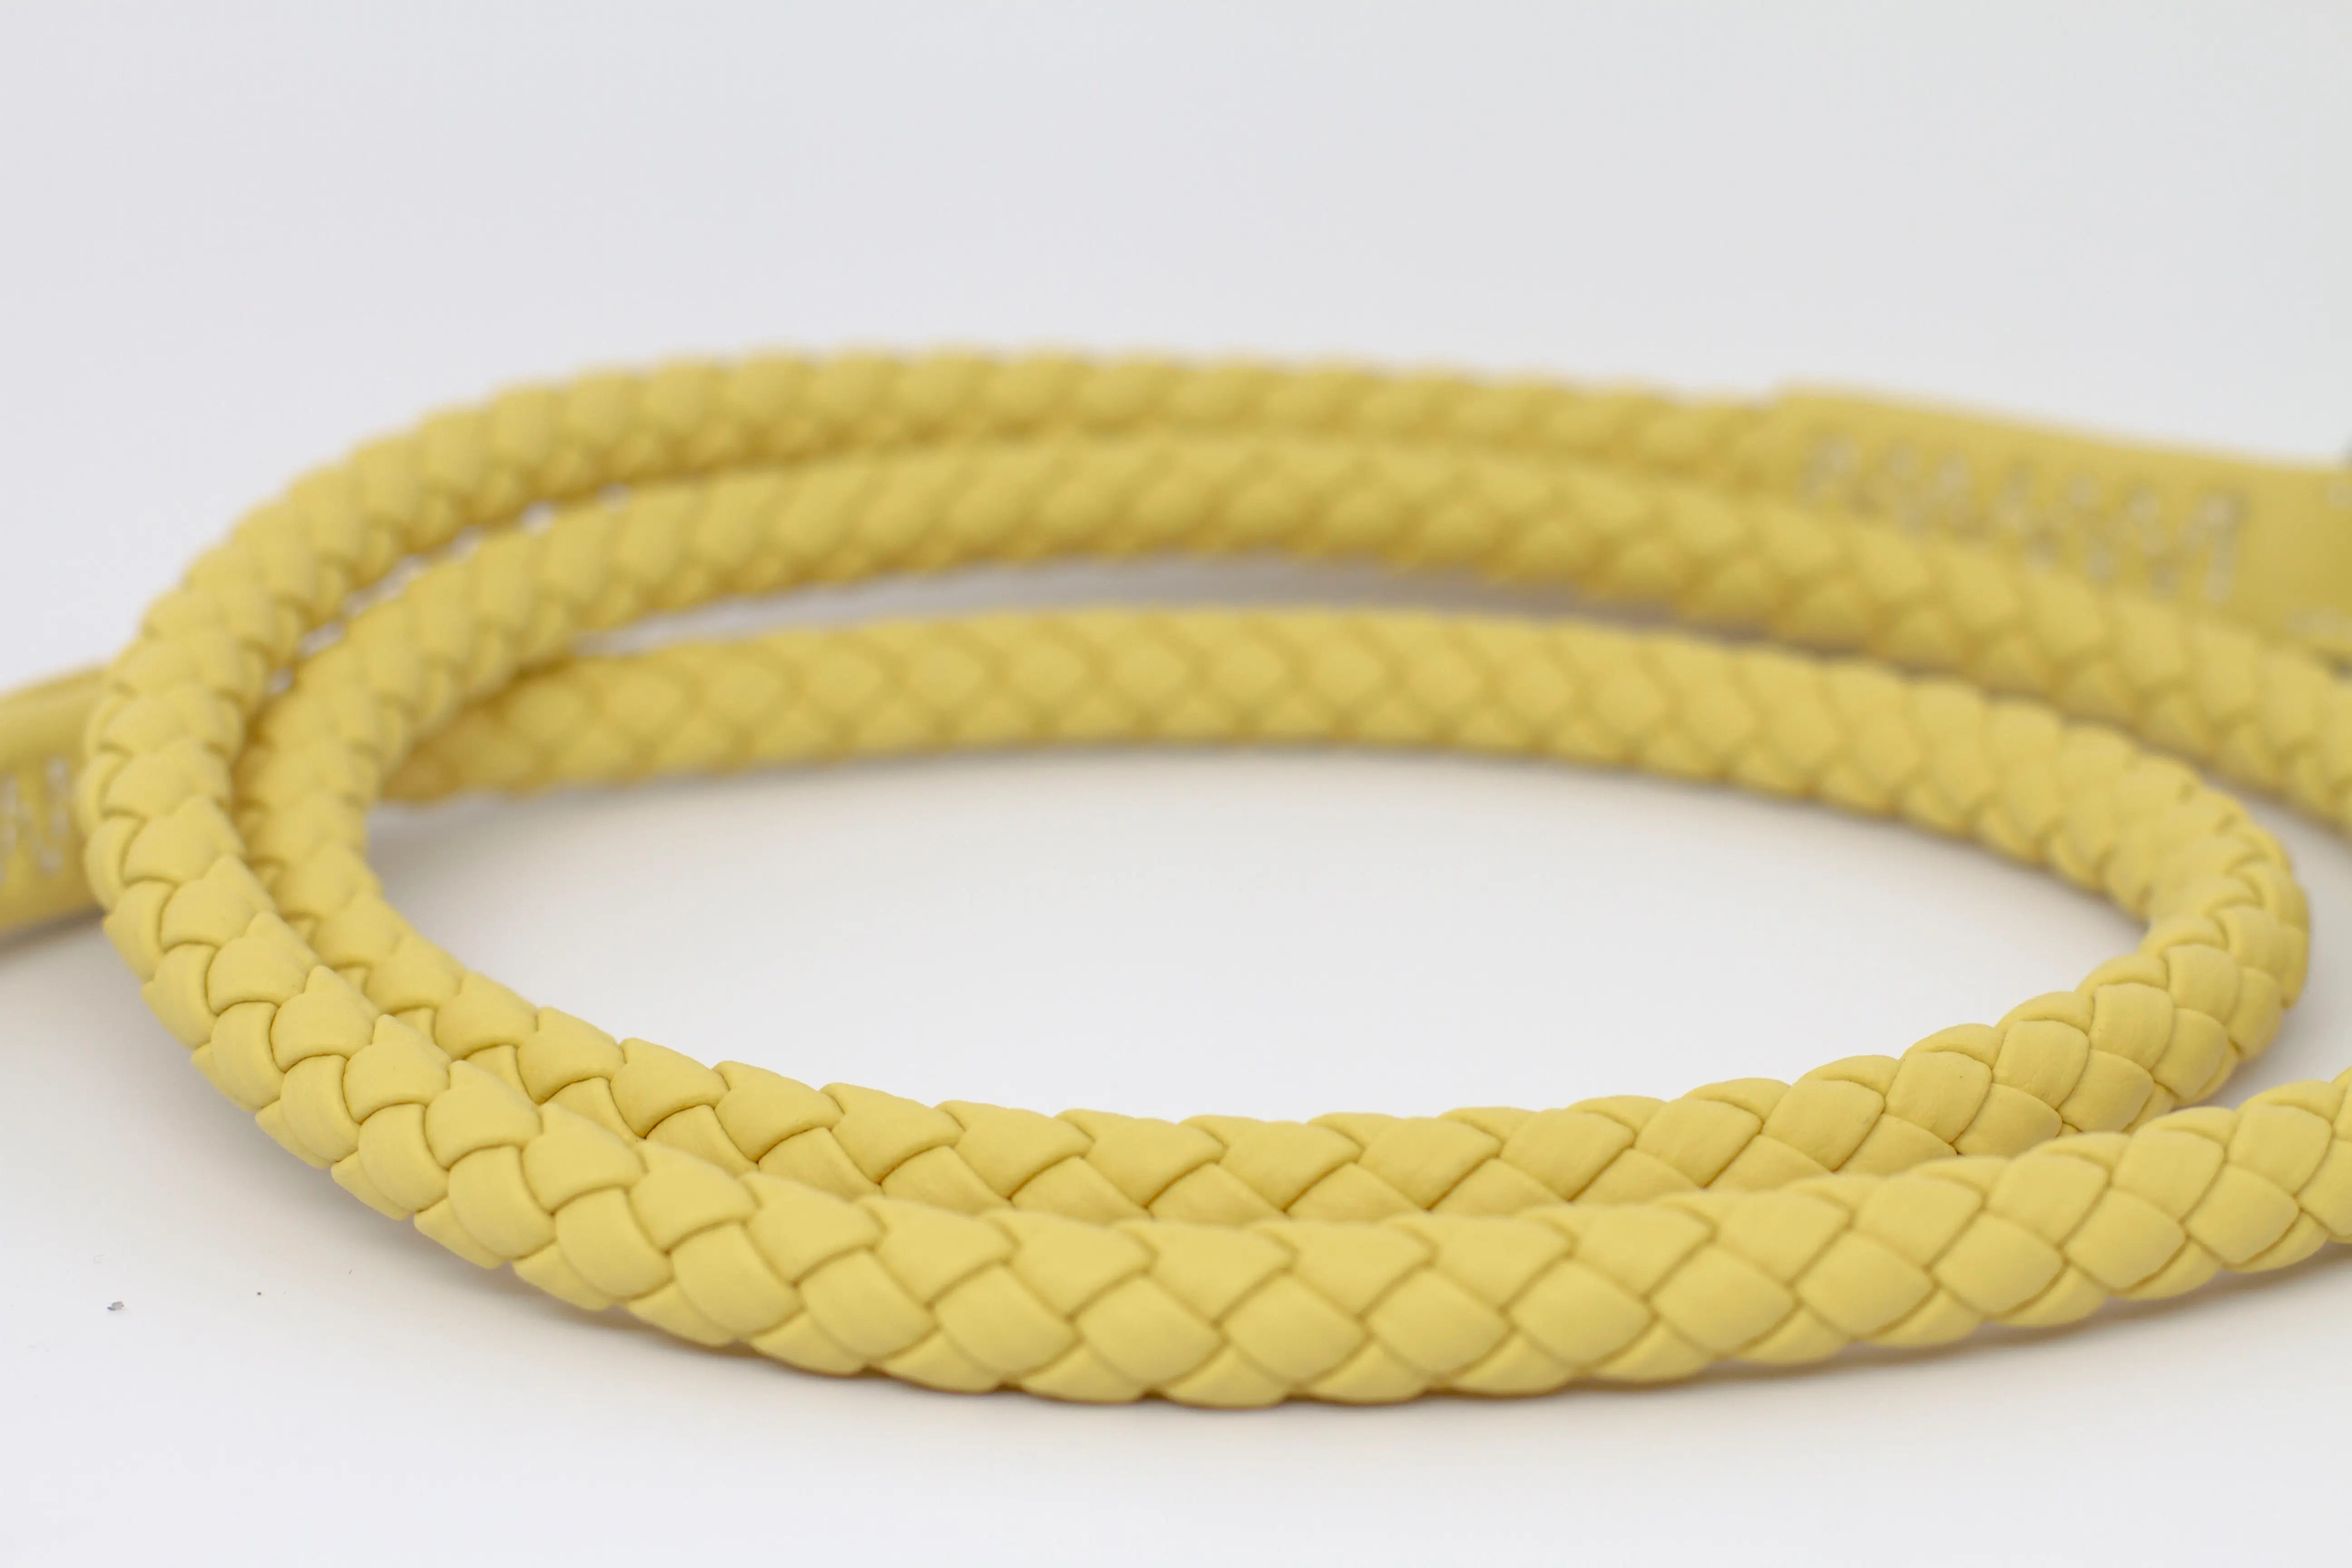 Close up of the braid of waterproof and durable dog leash with marine grade anodized aluminum hardware in the color honey yellow.